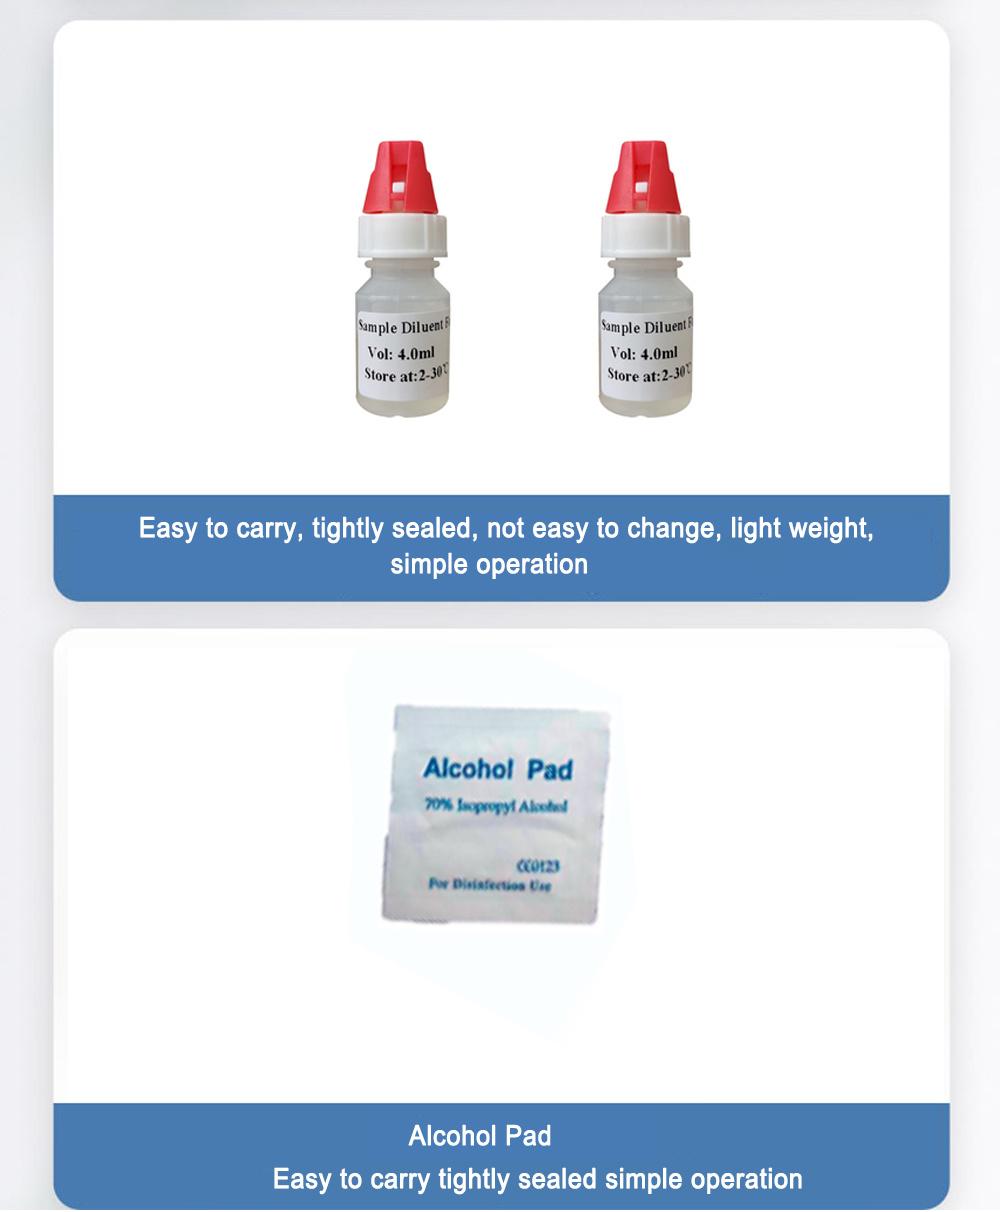 Medical Rapid Test Kits CE Approved Malaria Pan Test Kit